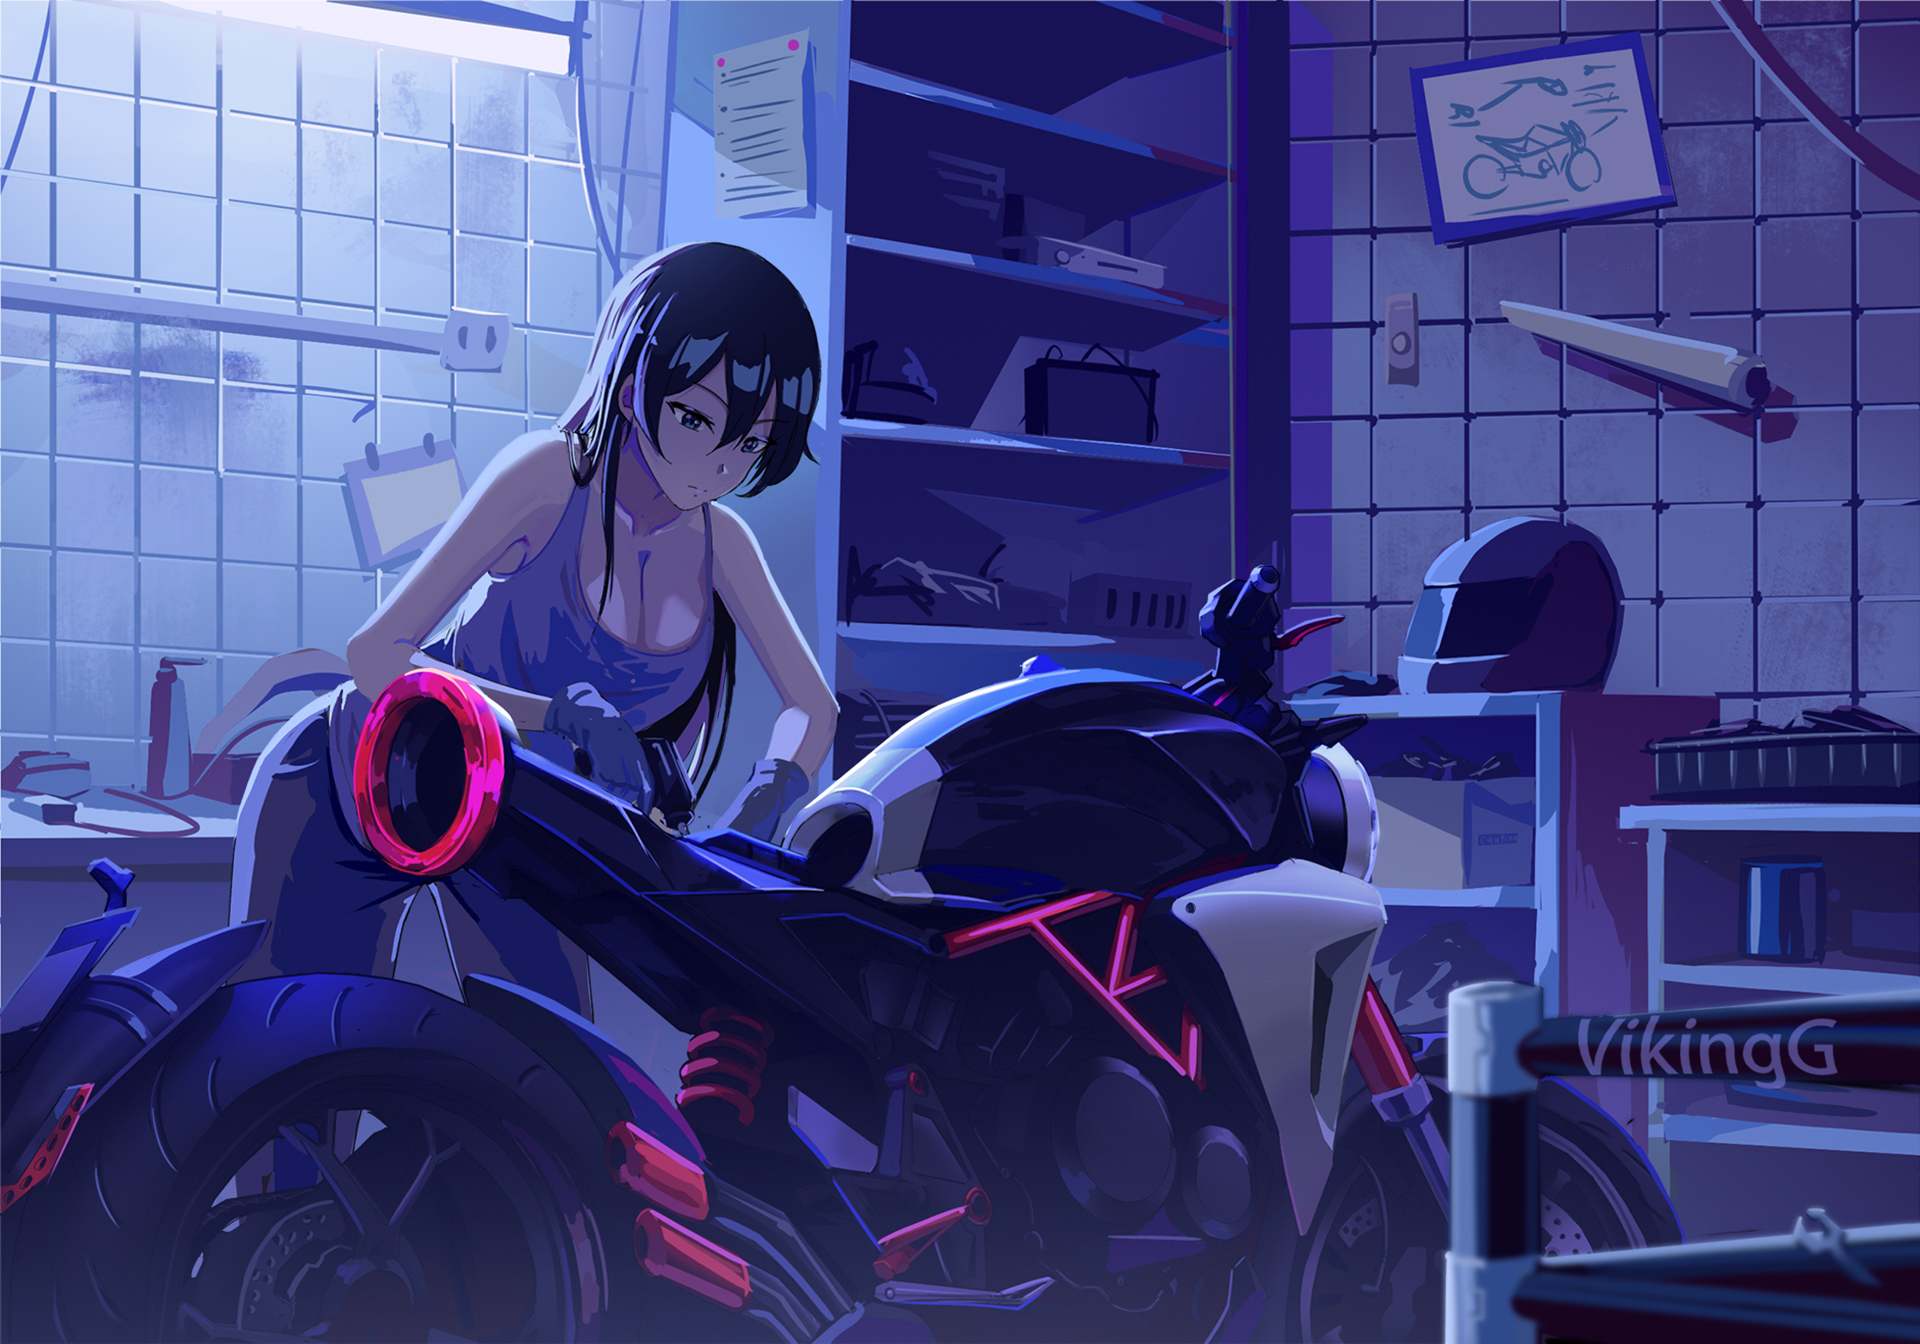 Anime Motorcycle Wallpapers